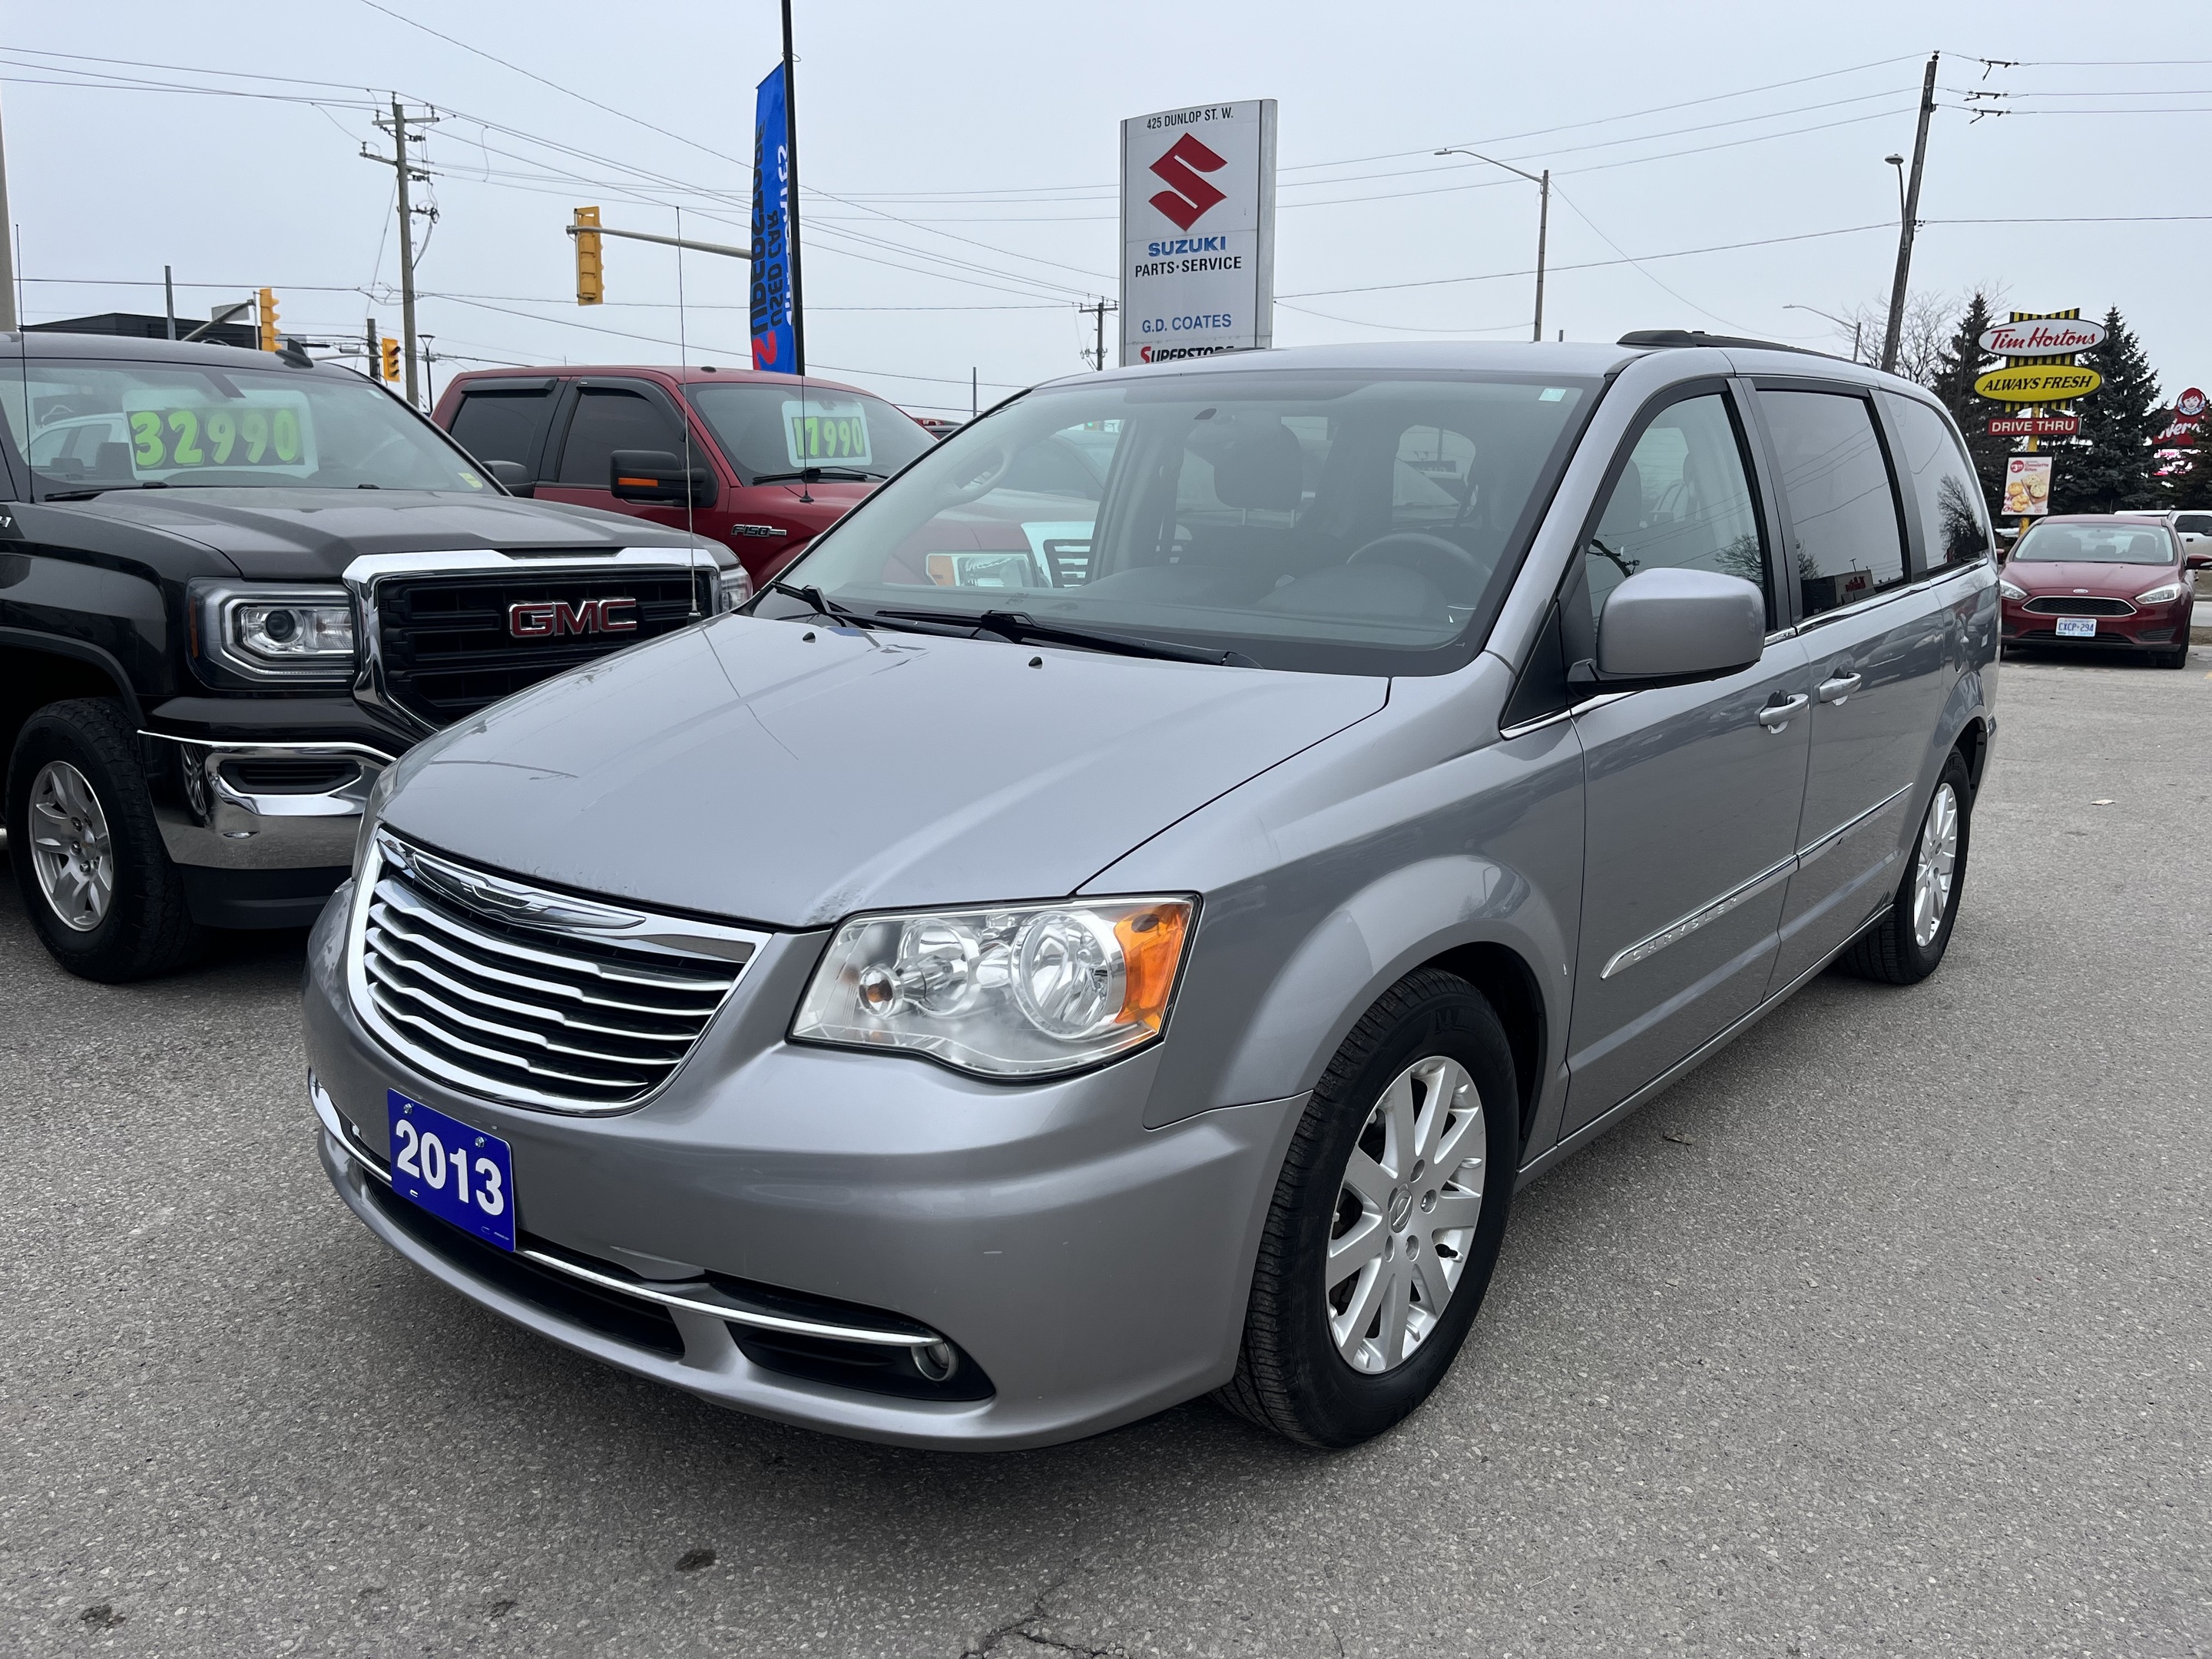 2013 Chrysler Town & Country Touring ~Backup Camera ~Power Seats ~Alloy Wheels